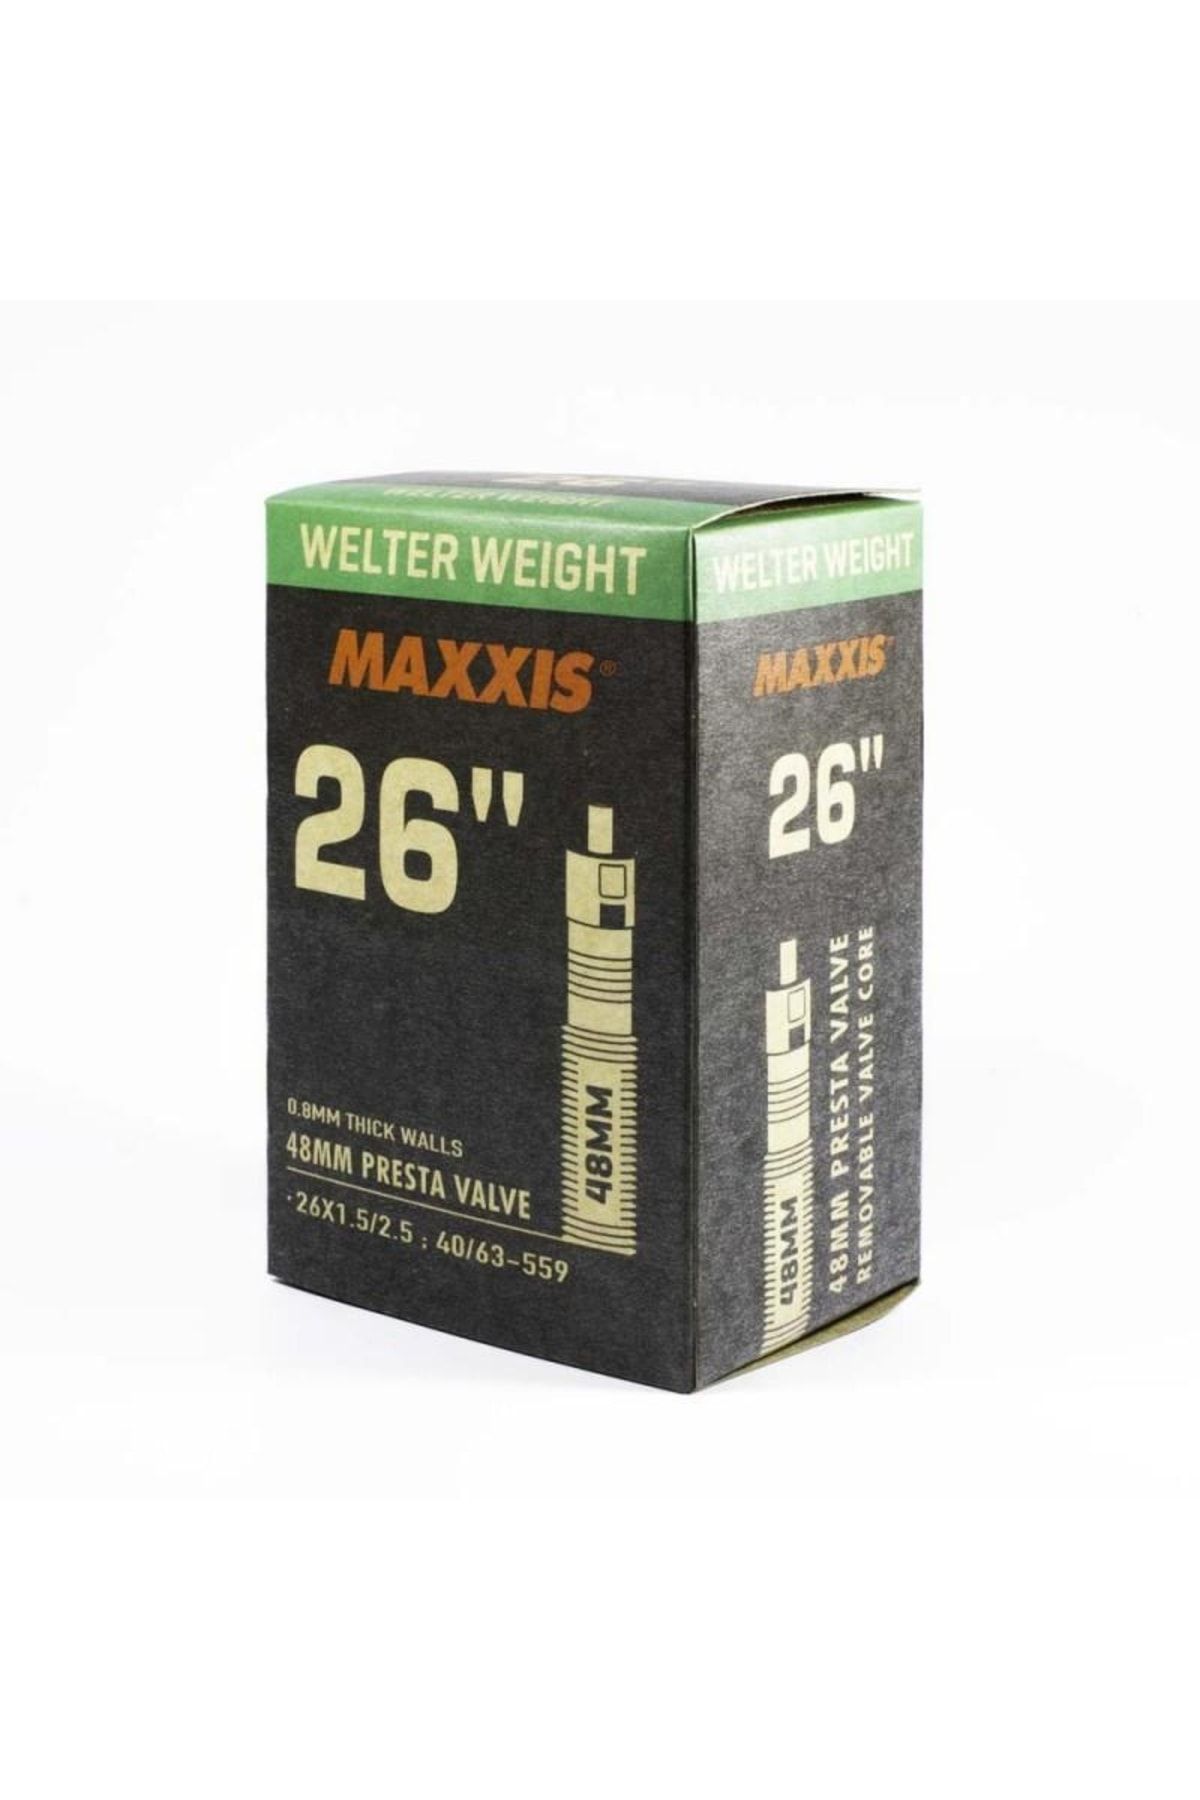 Maxxis Welter Weight Iç Lastik 26x1.50-2.50 Ince Sibop 48mm